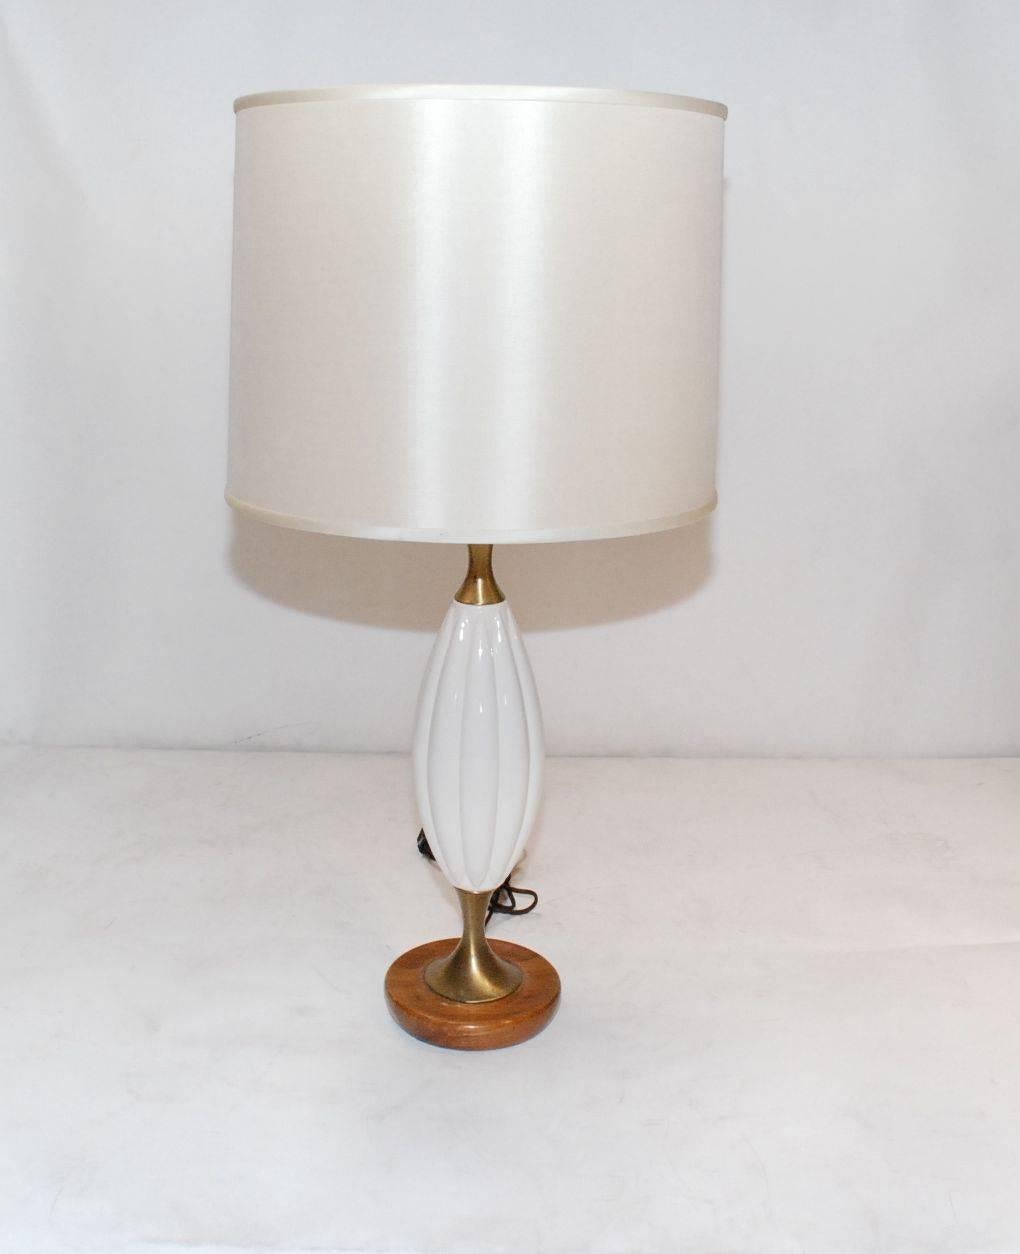 Elegant pair of 1960s white ceramic with brass and wood details.